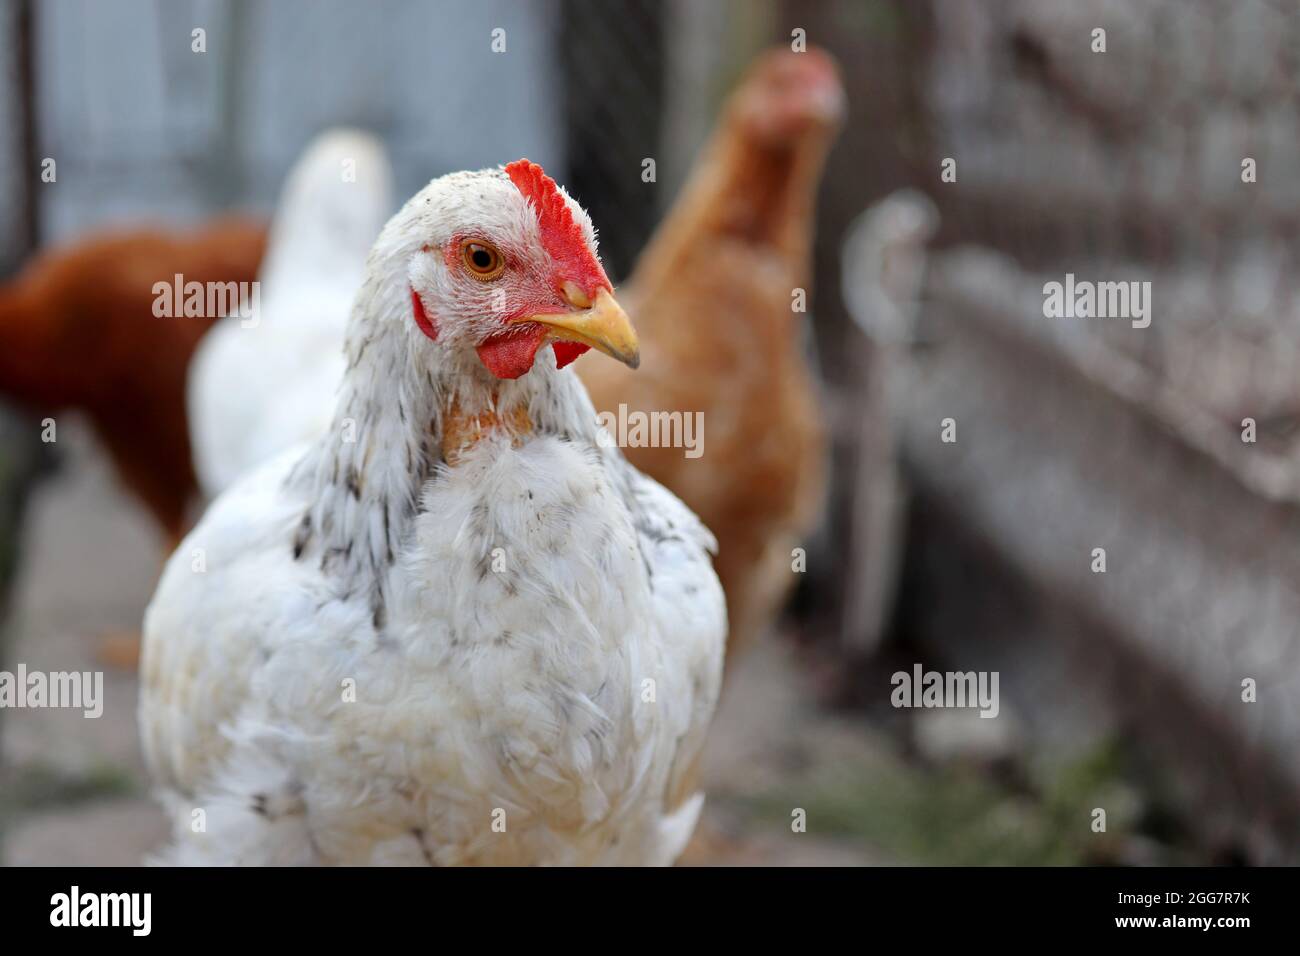 White hen on the farm, poultry concept. Chickens on rural background Stock Photo